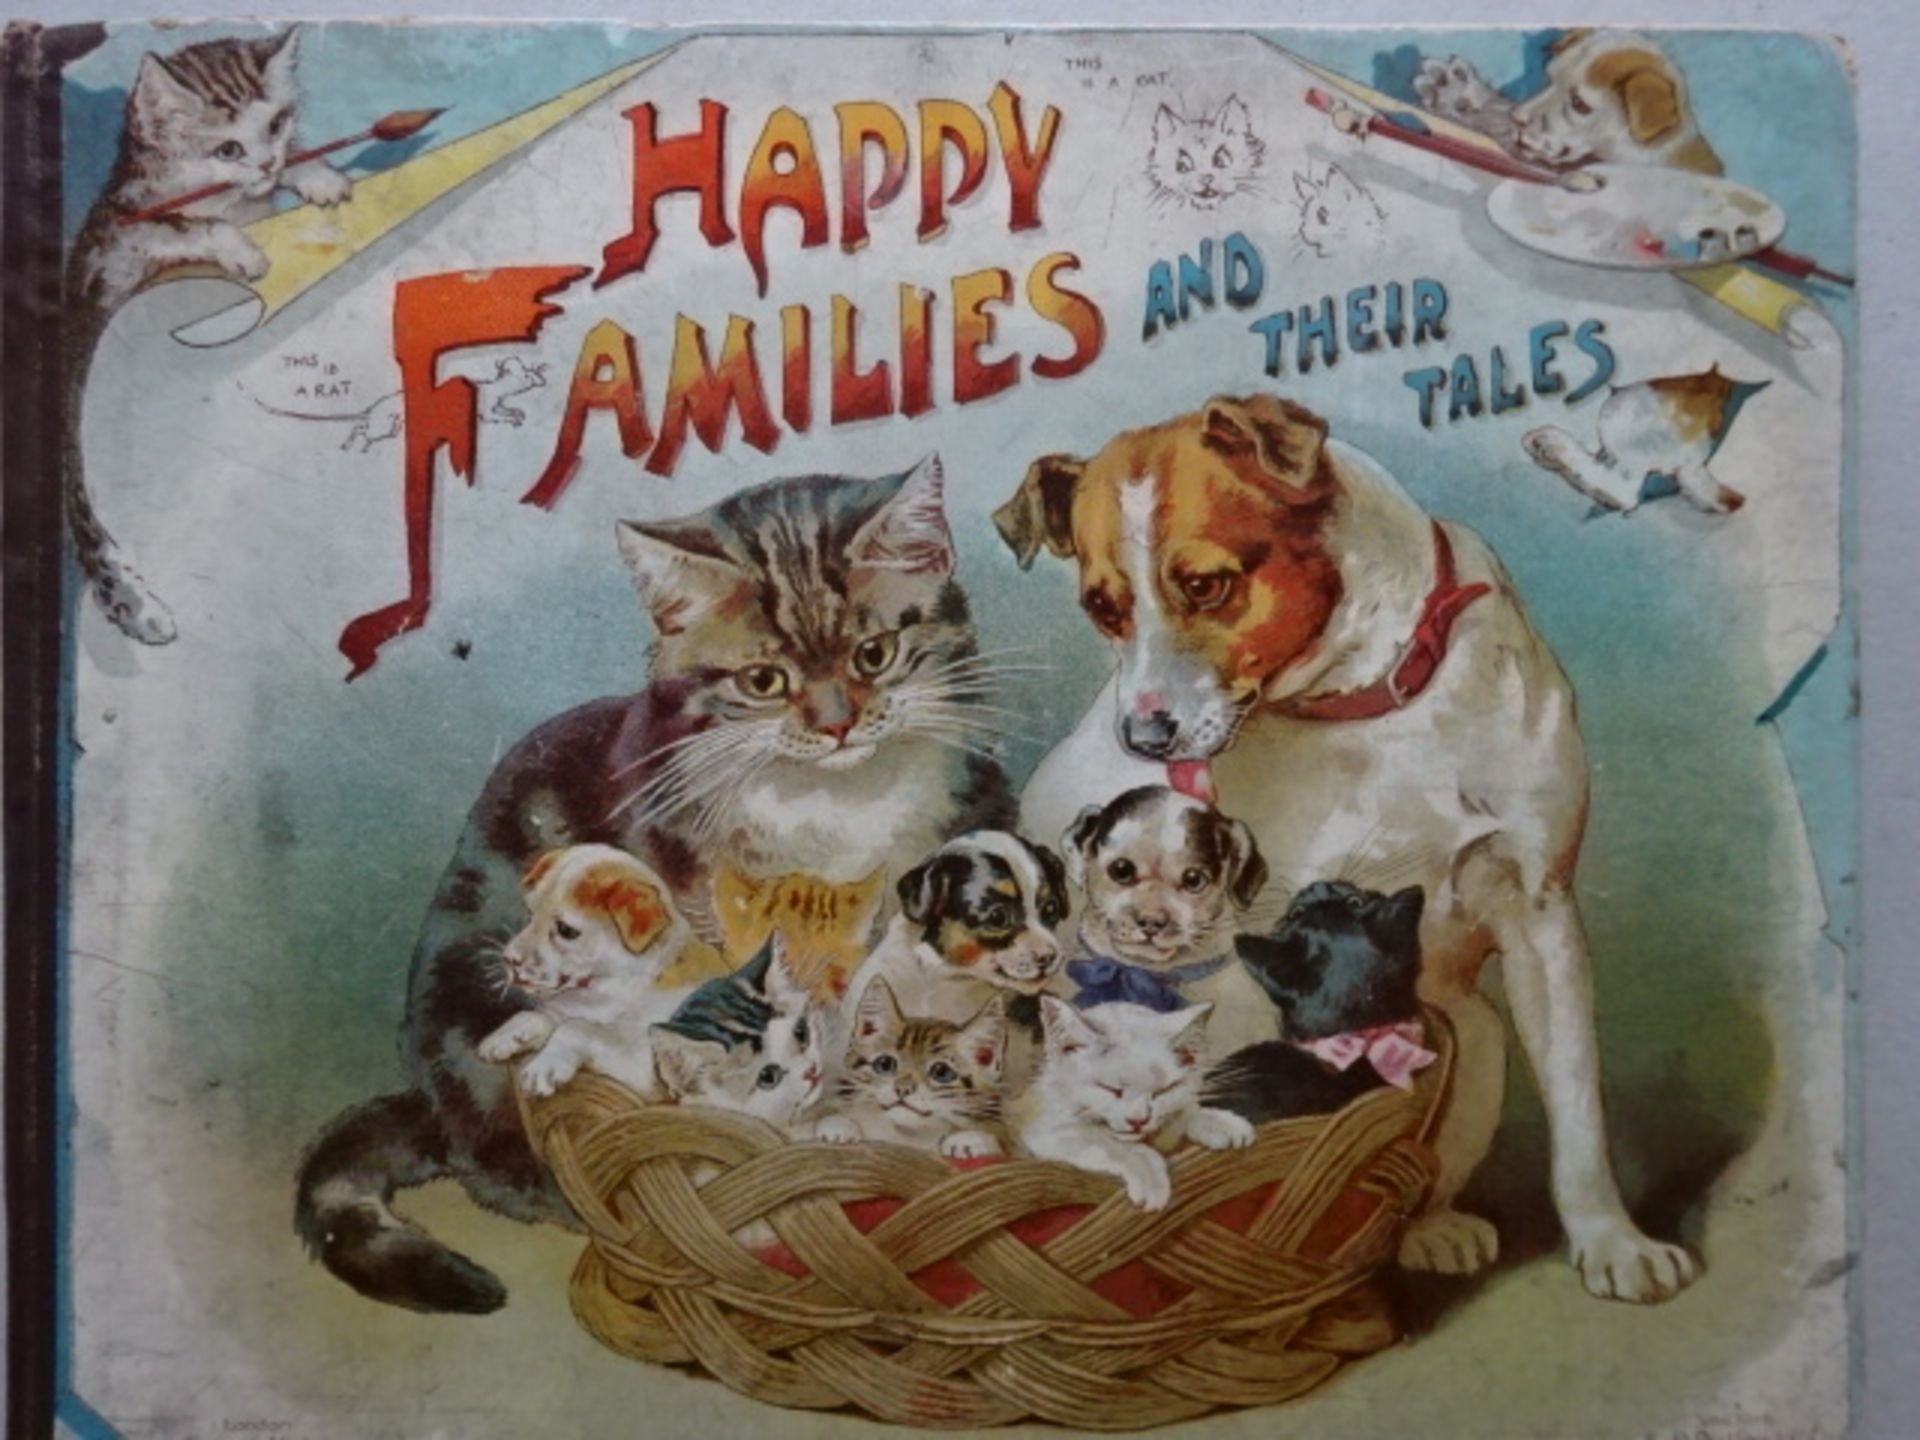 Happy Families and their Tales